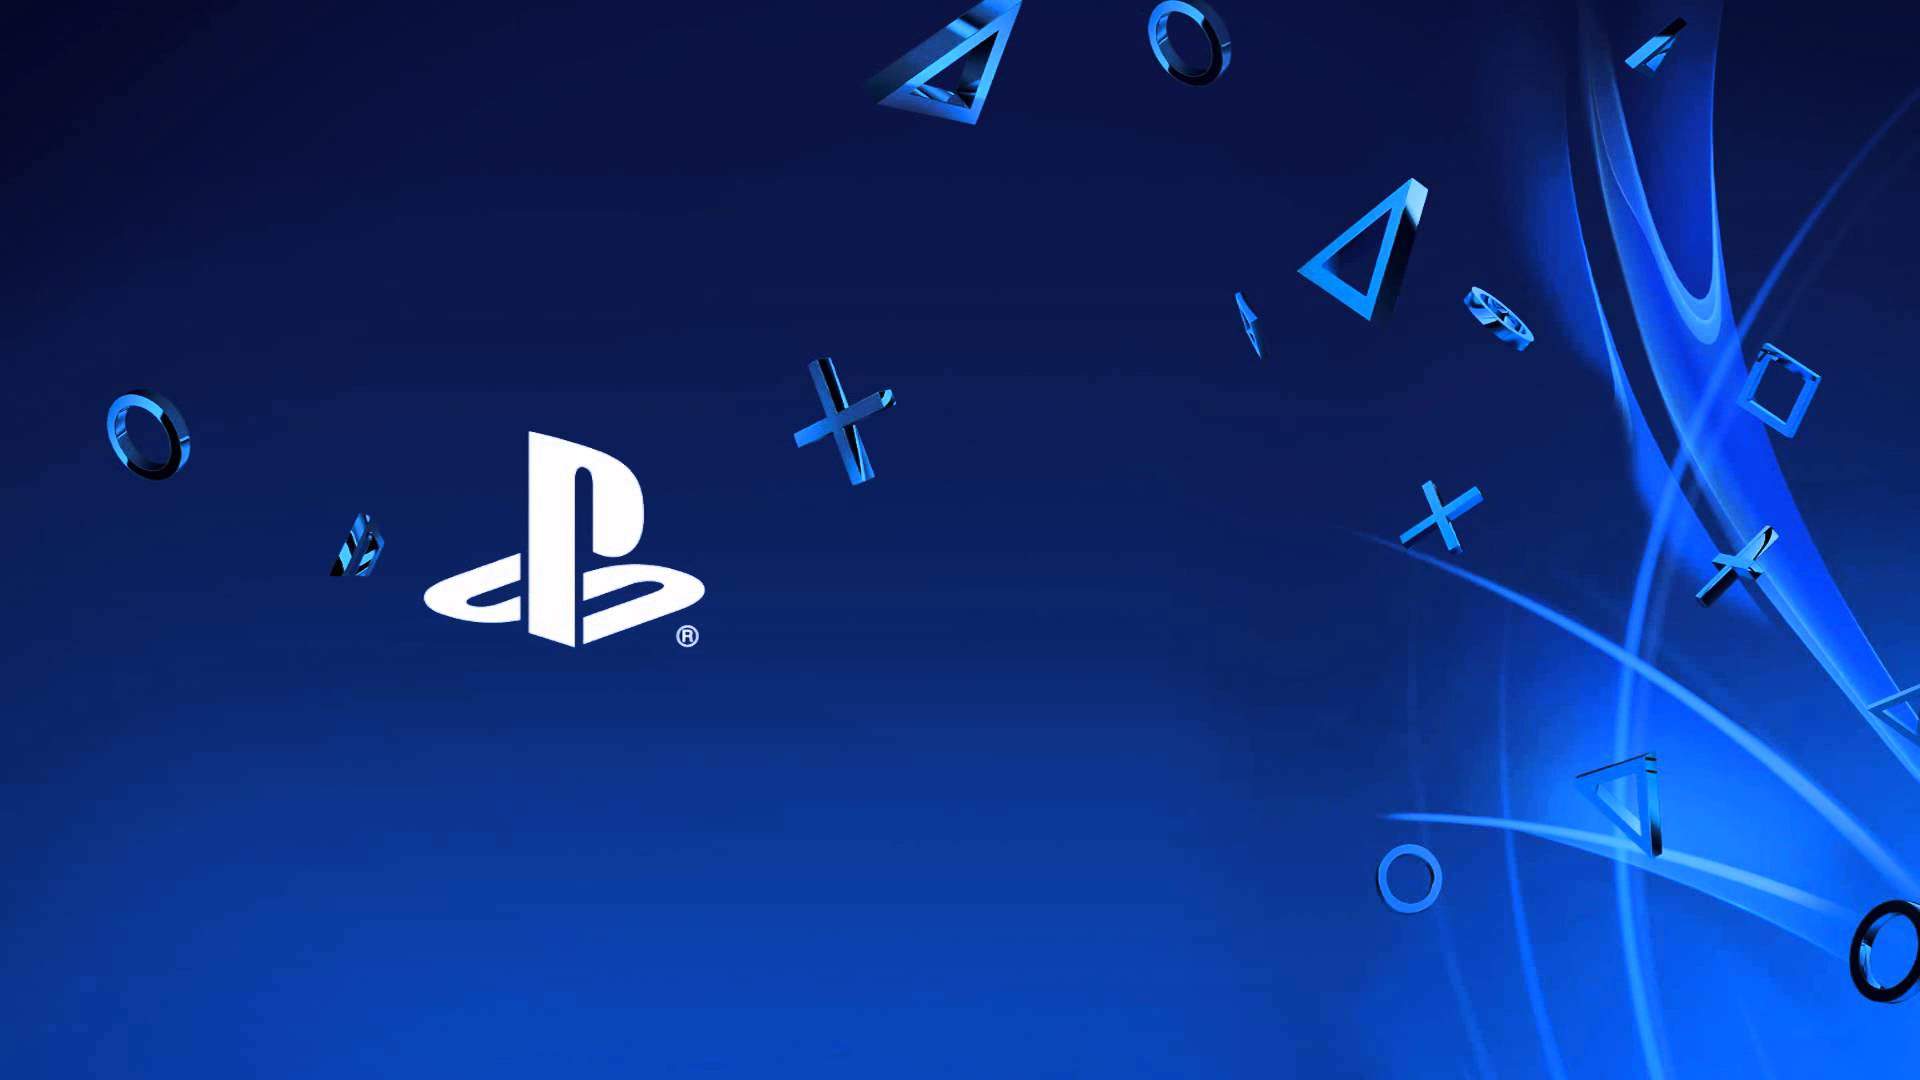 Playstation Live Wallpaper wallpaper Collections